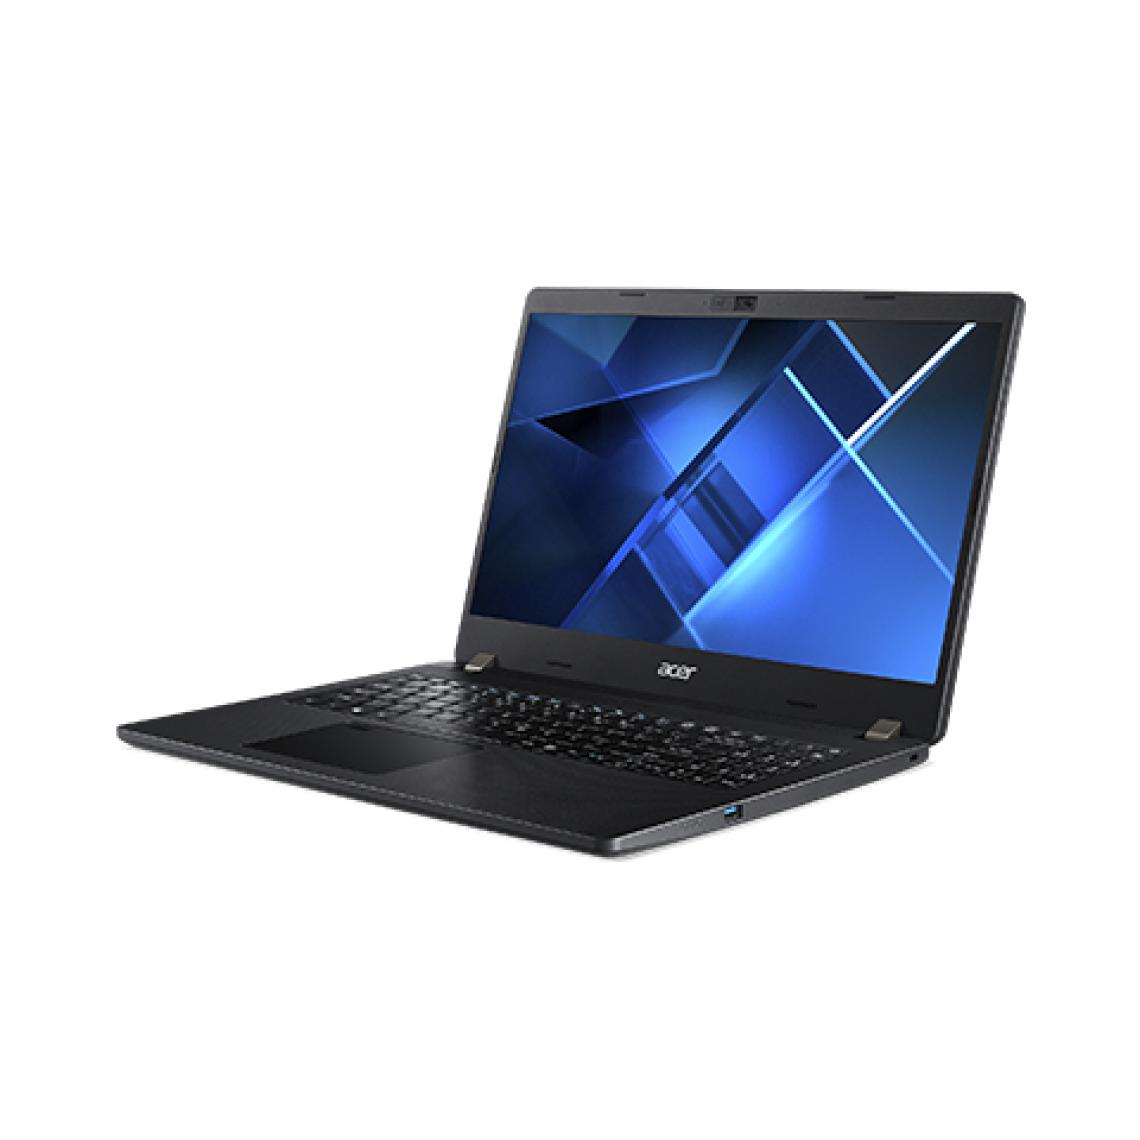 Acer - TMP215-53-70U8 i7-1165G7 15.6p TMP215-53-70U8 Intel Core i7-1165G7 15.6p FHD IPS 8Go 256Go PCIe NVMe SSD + Graphic Card Integrated W10P 3a - PC Portable